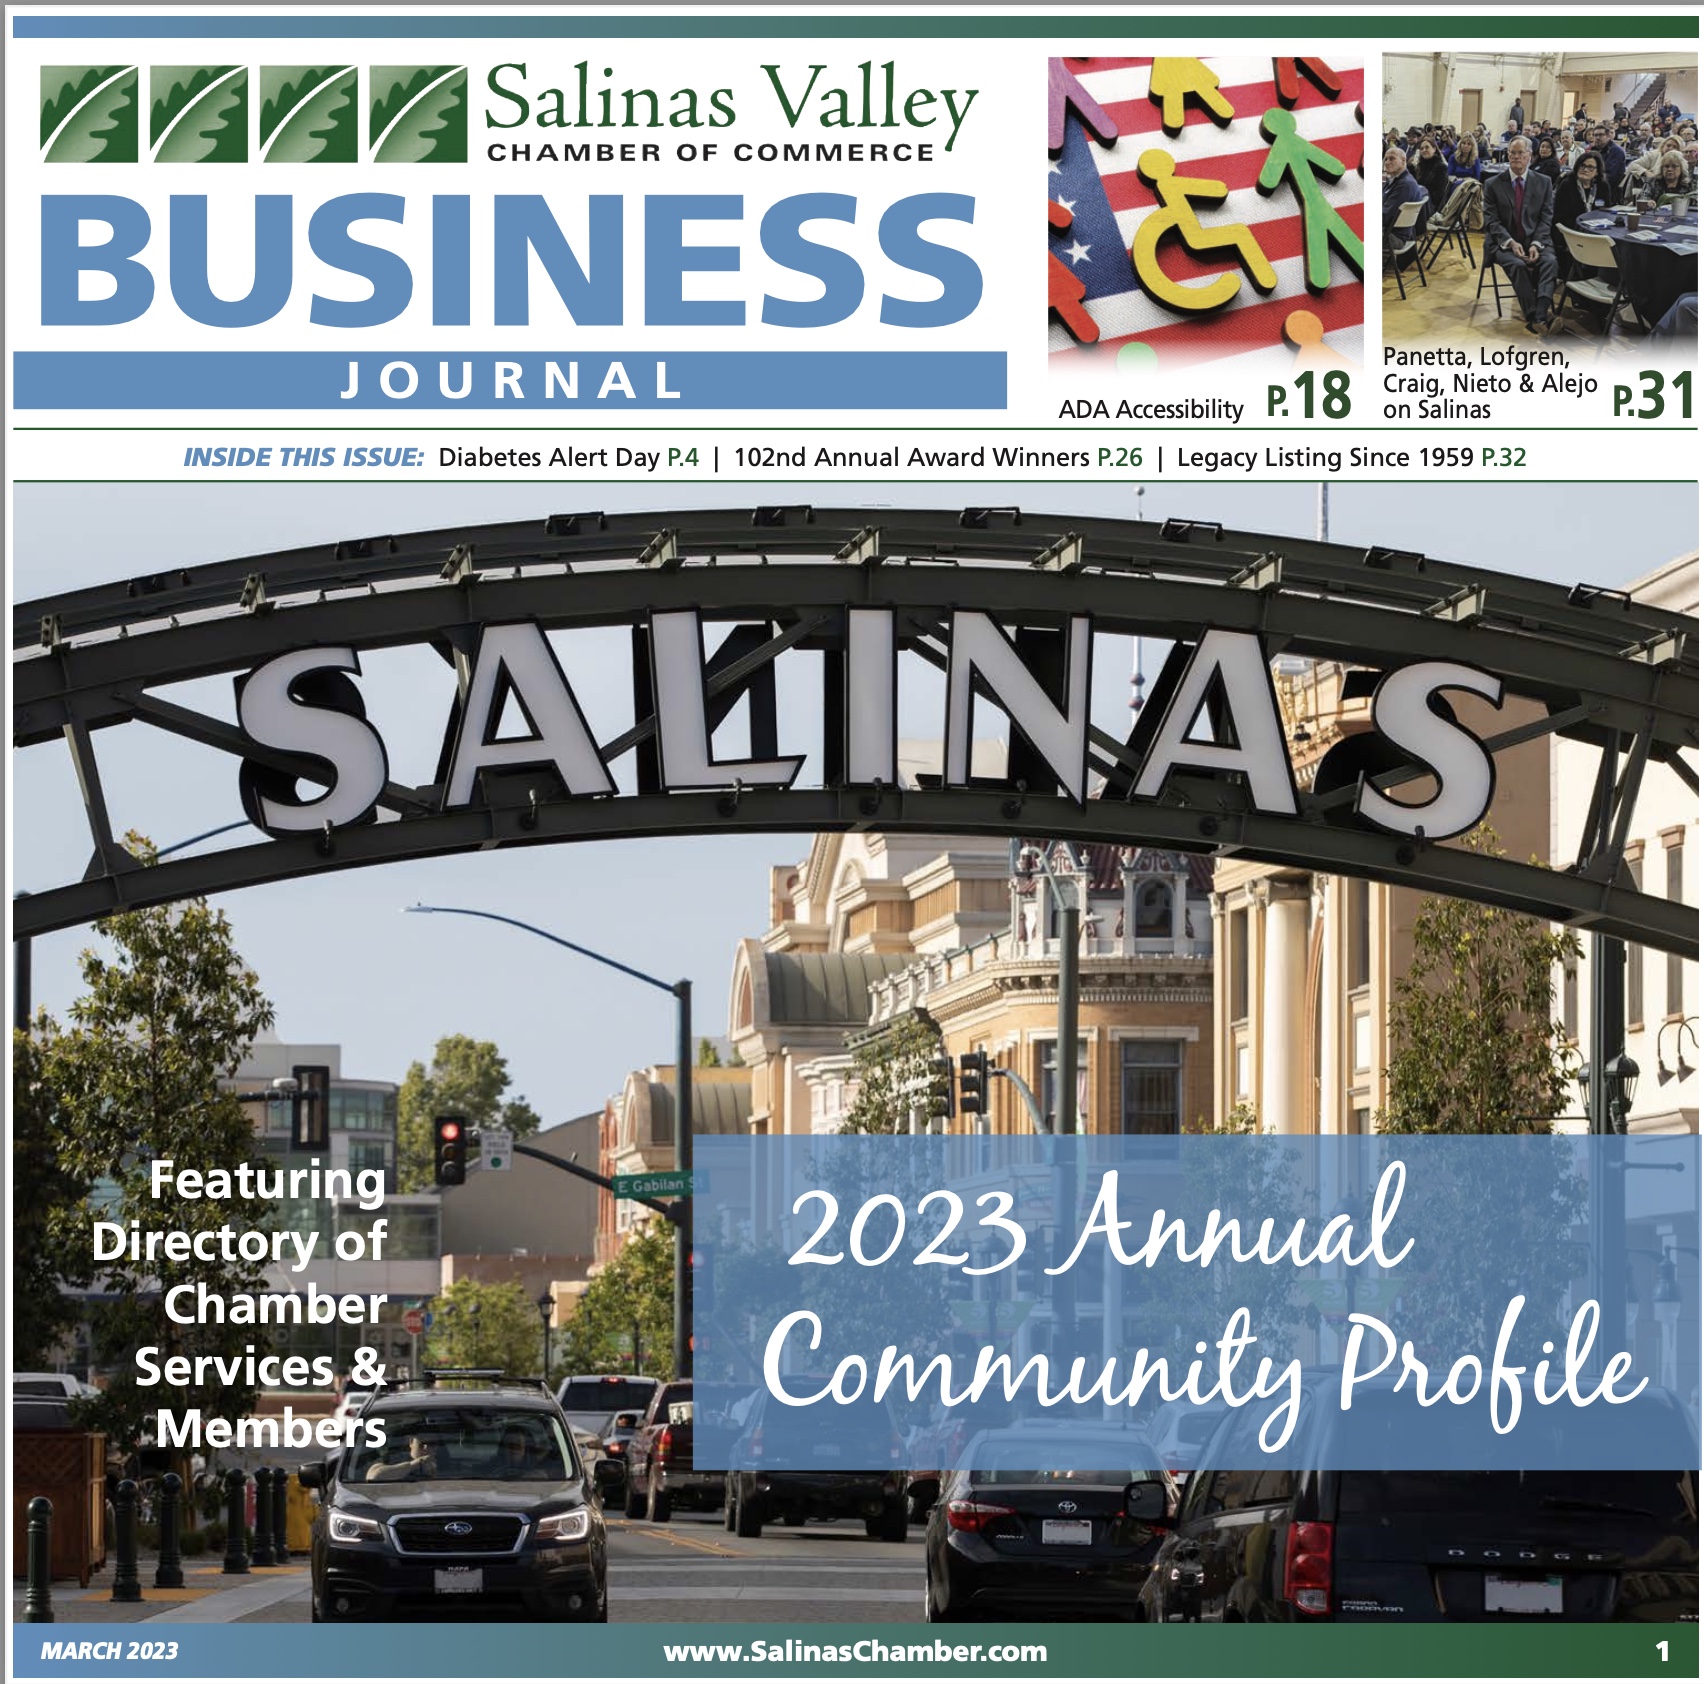 Annual Guide featuring community profile and directory of chamber members and businesses.